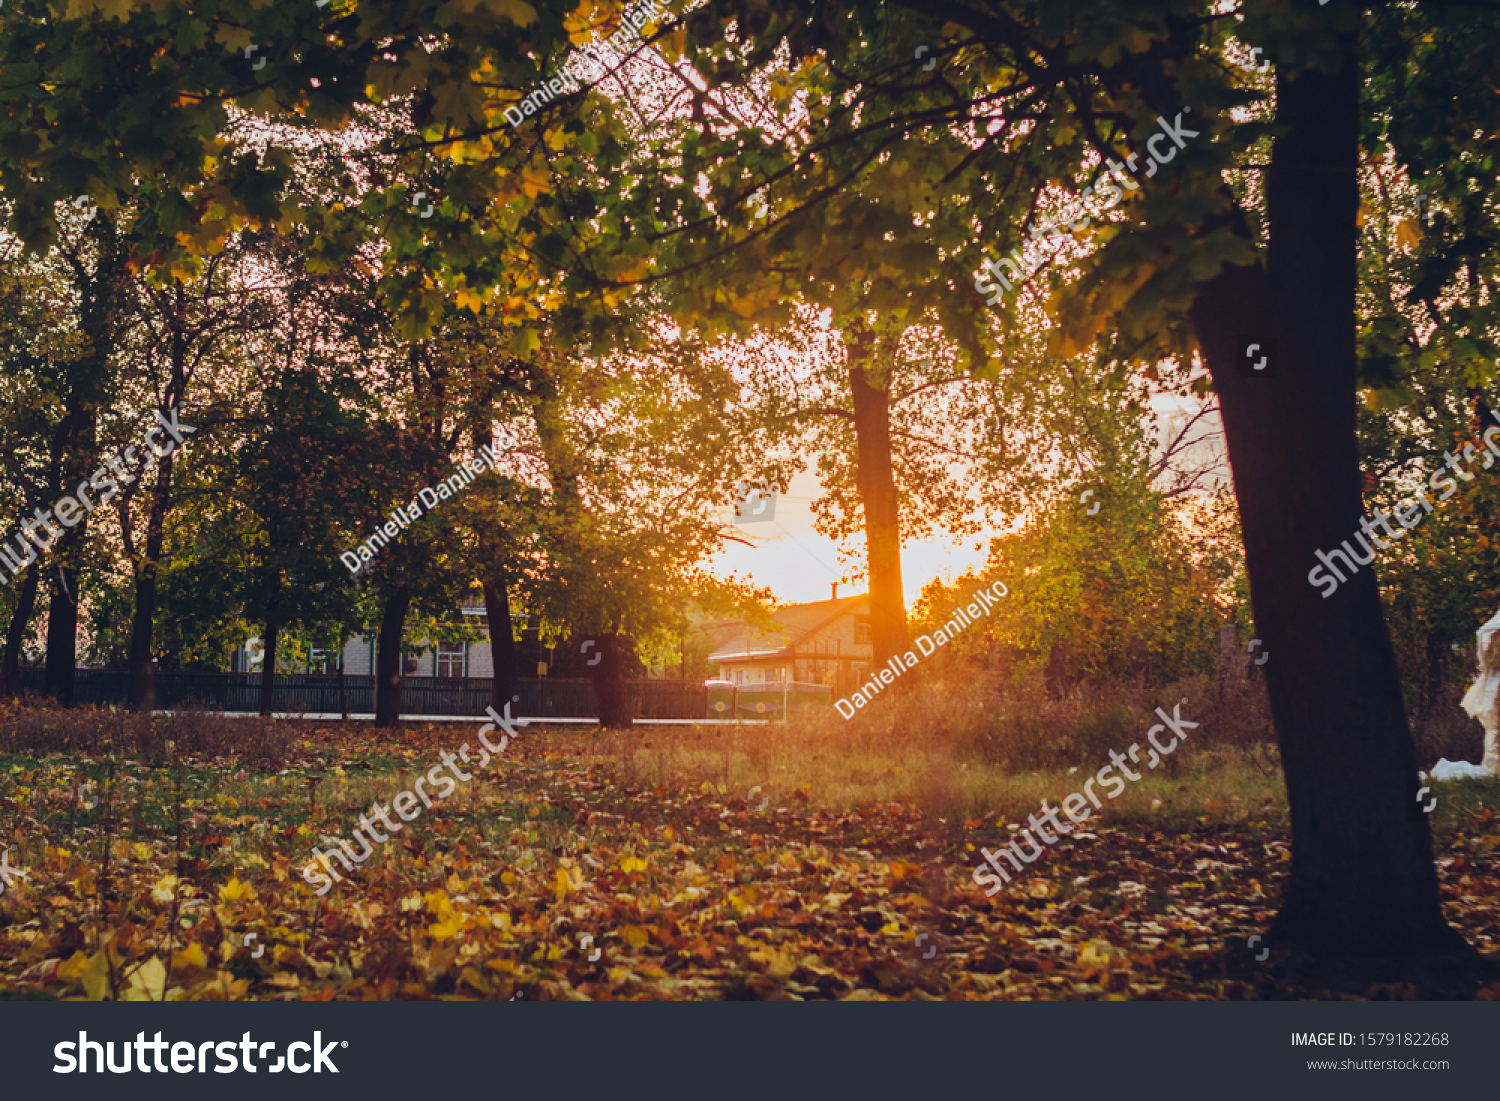 Autumn Tree and Sun during Sunset. Golden sunset in bokeh background. Golden autumn leaf illuminated by a low bright autumnal sun from behind, amongst other red and brown fall leaves on the ground #1579182268